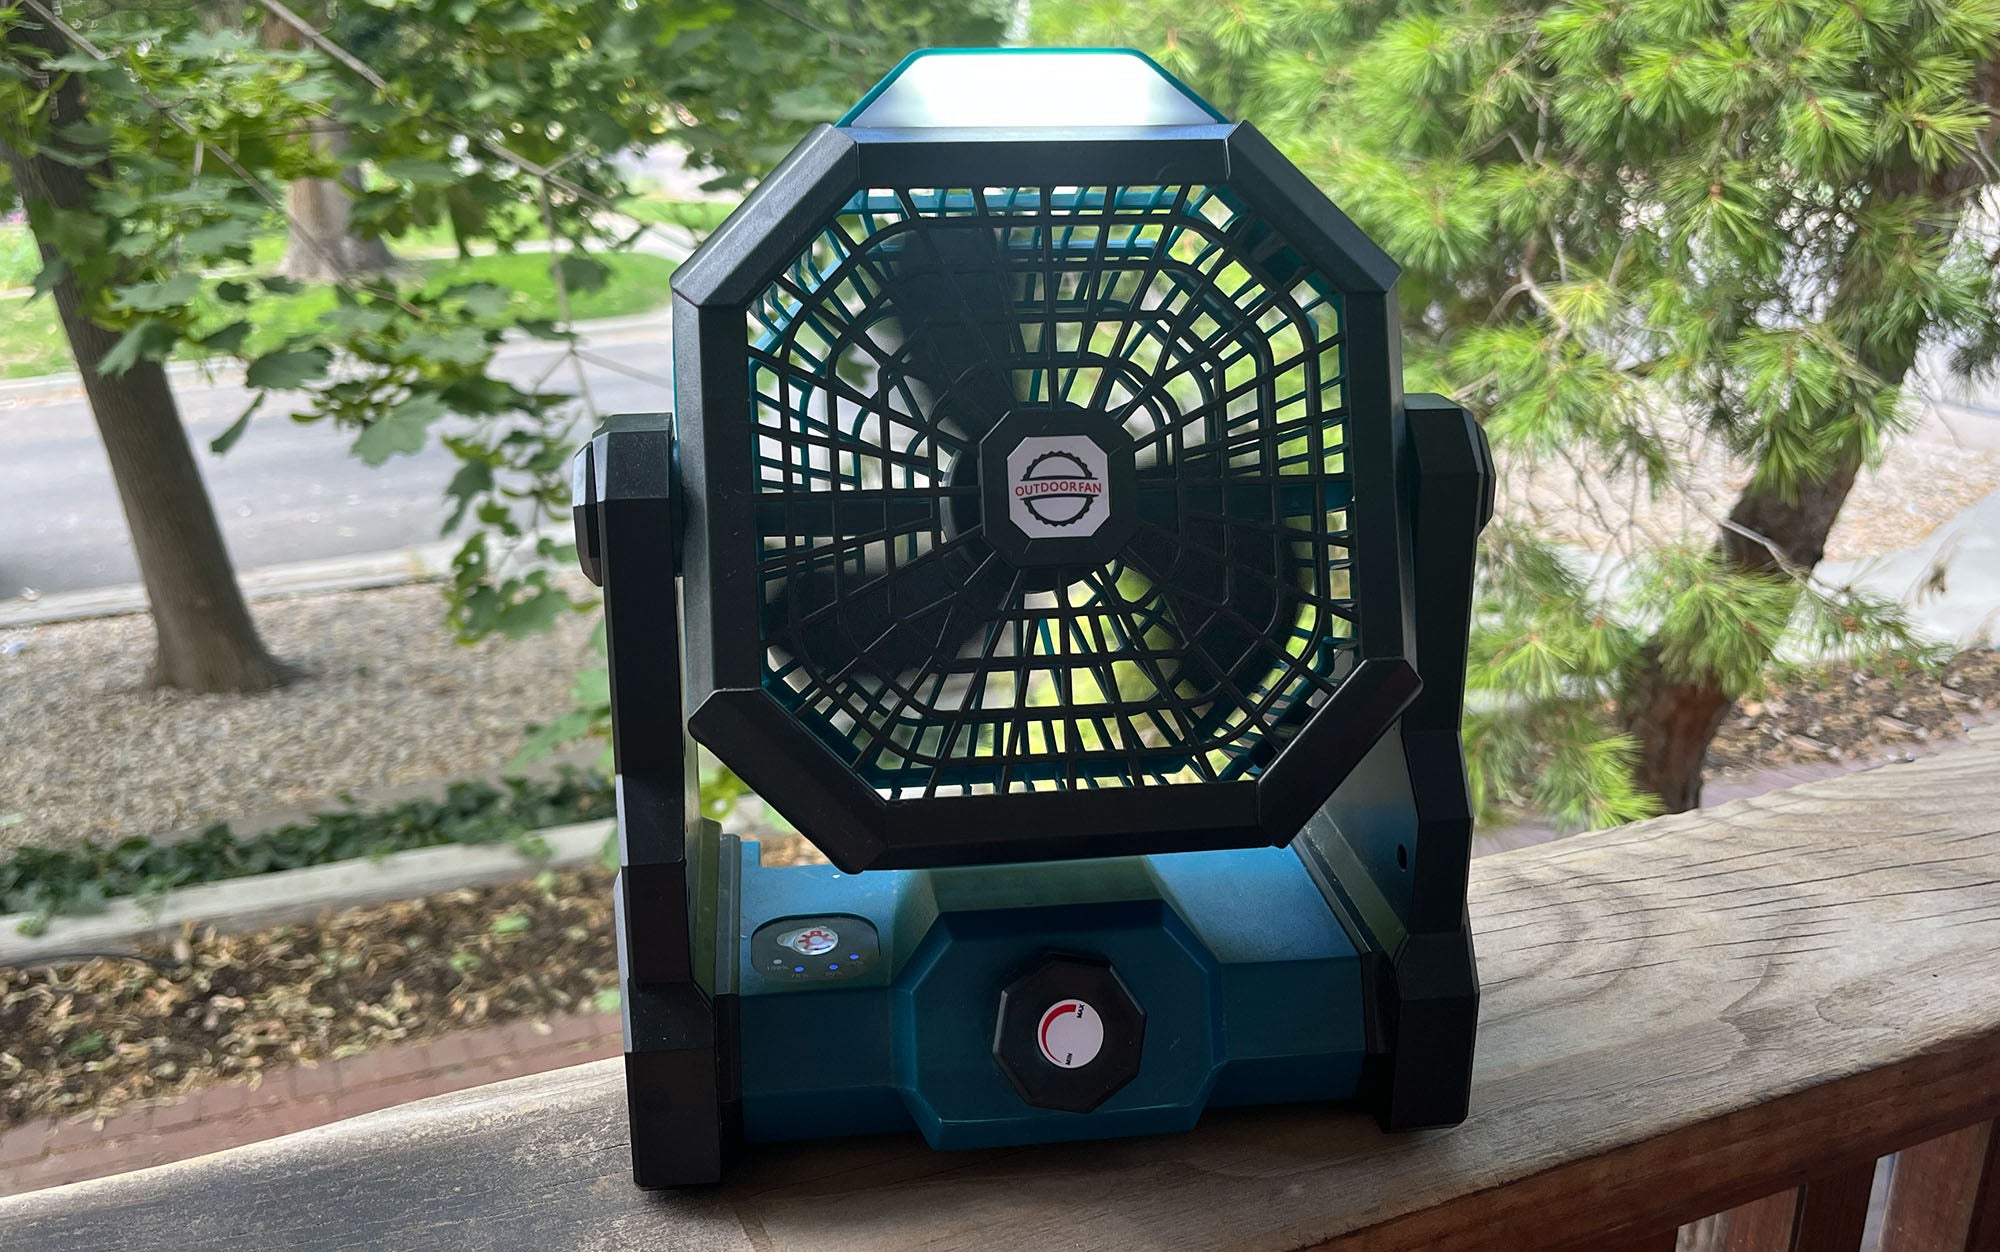 This fan provides a nice breeze while making dinner over a hot camp stove and keeps bugs off your food.